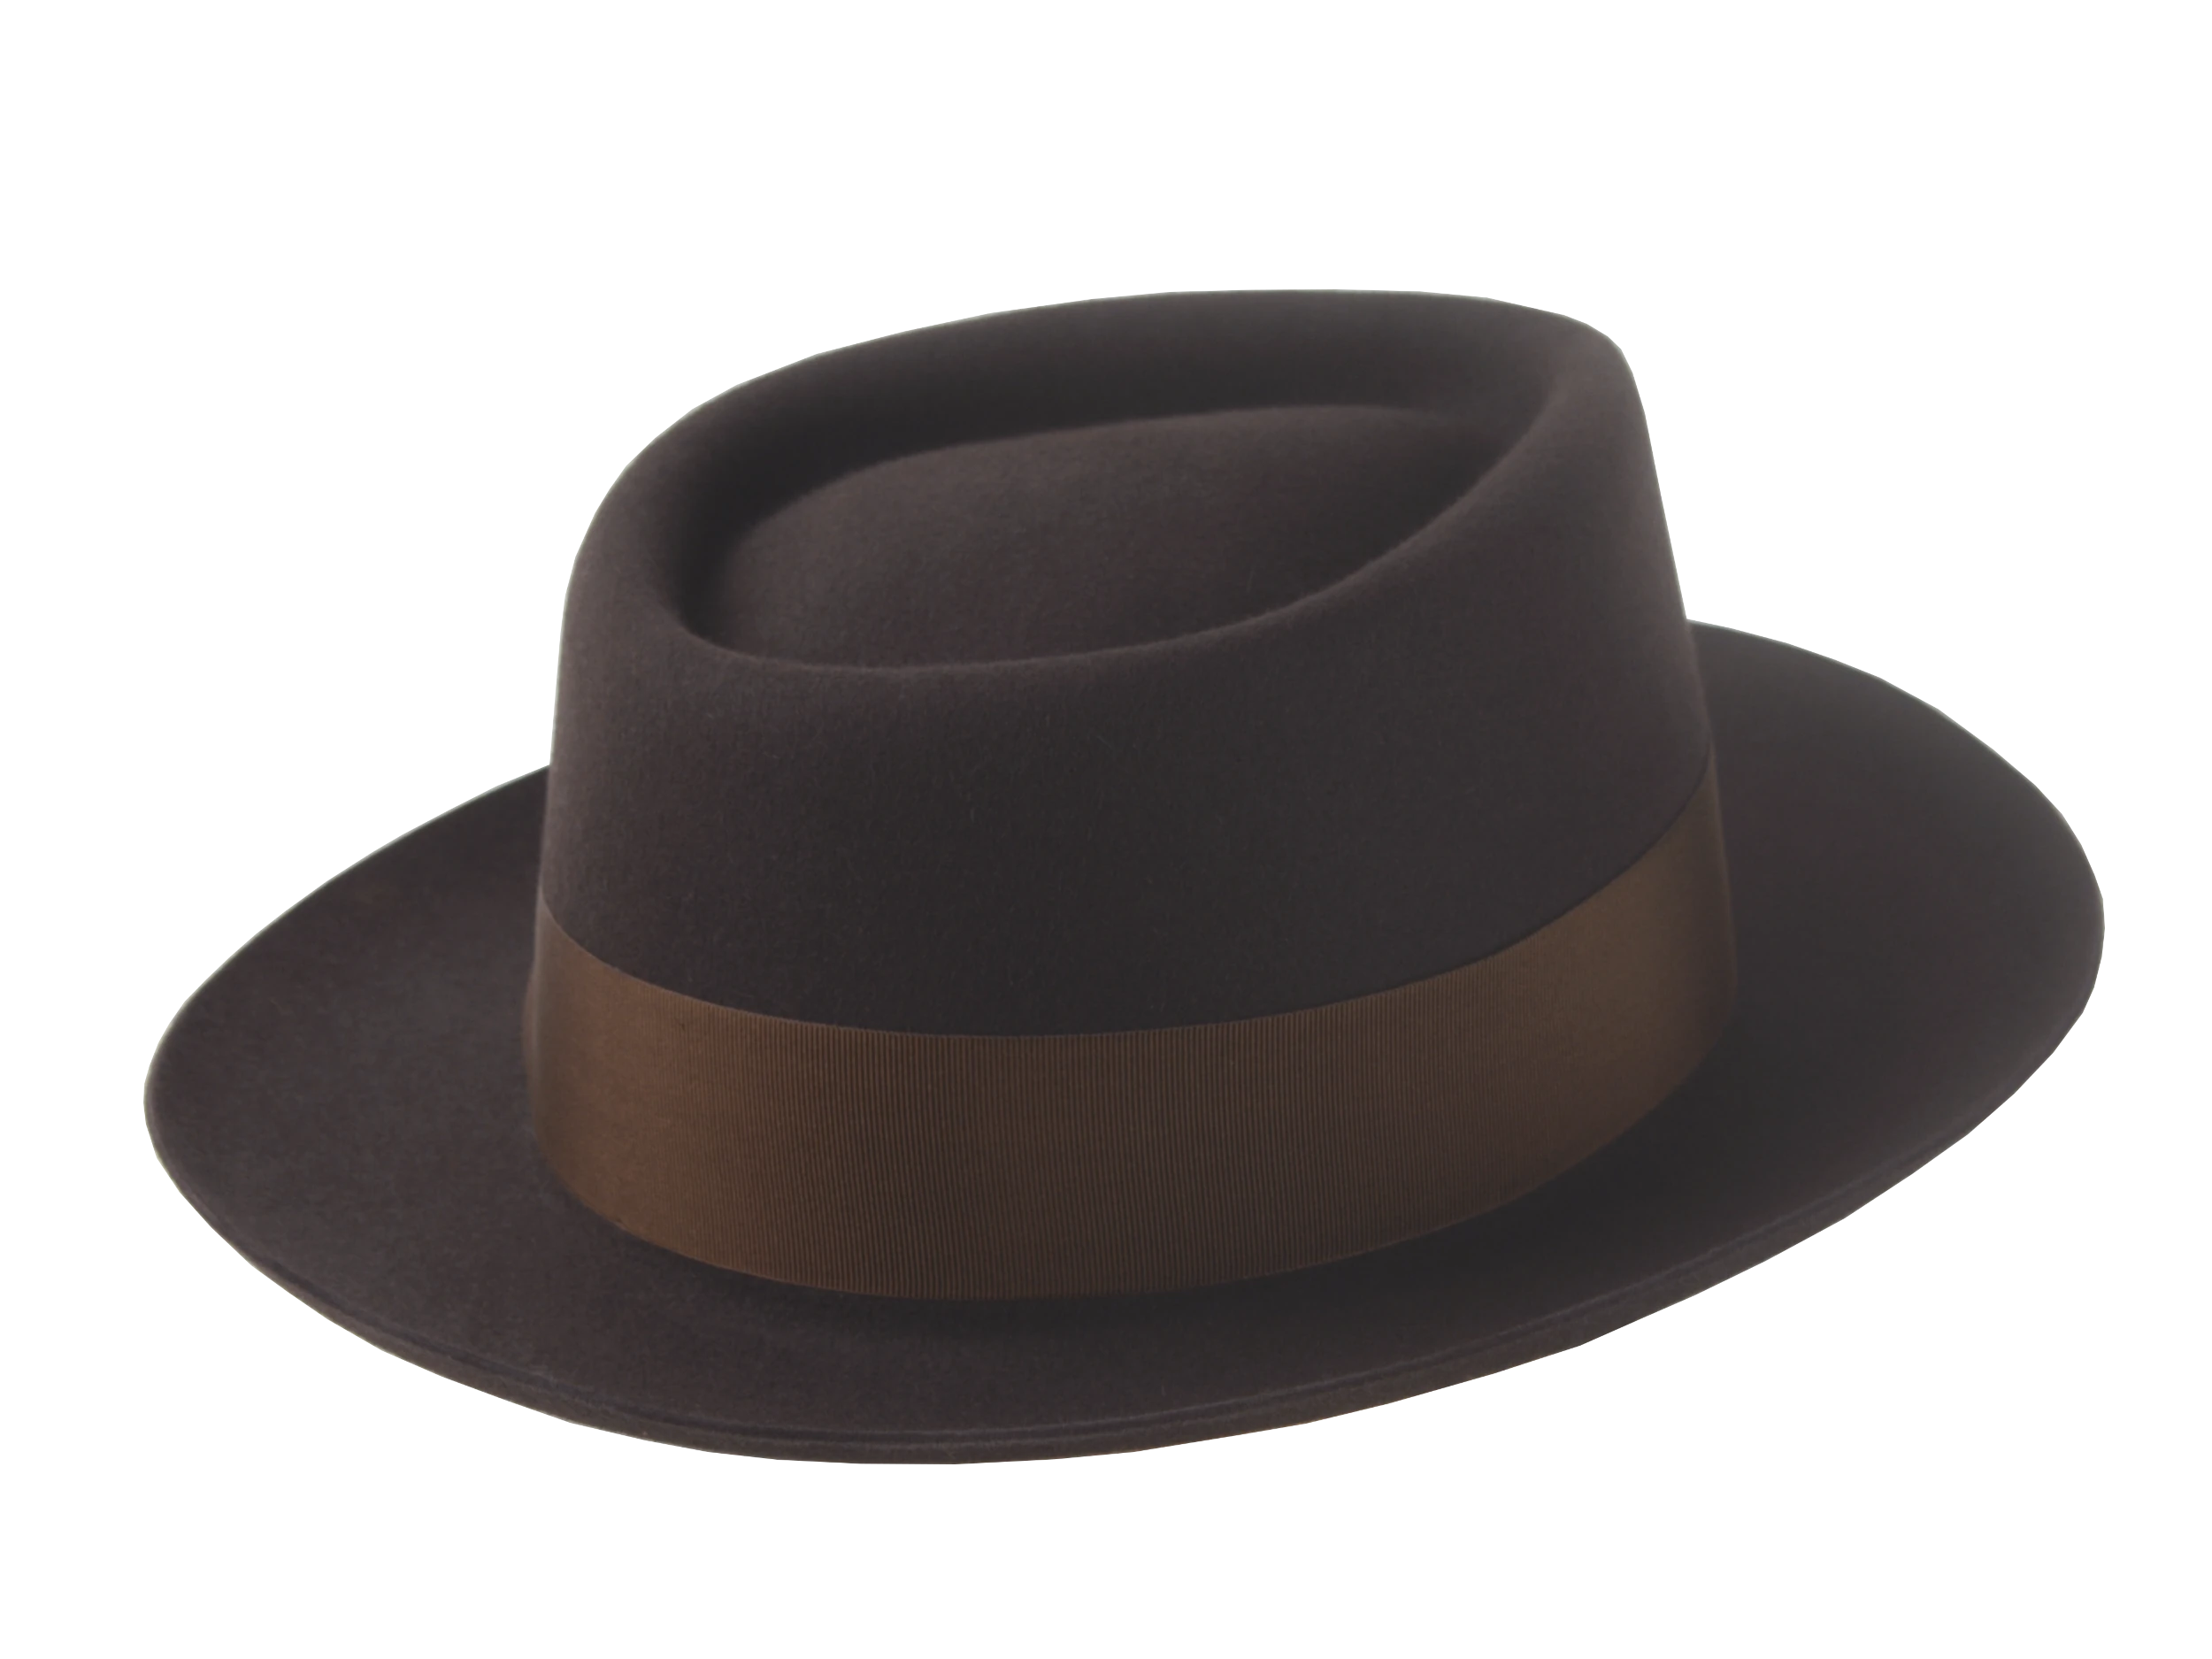 The Roamer: Side angle showcasing the elegant profile and crown height | Agnoulita Hats